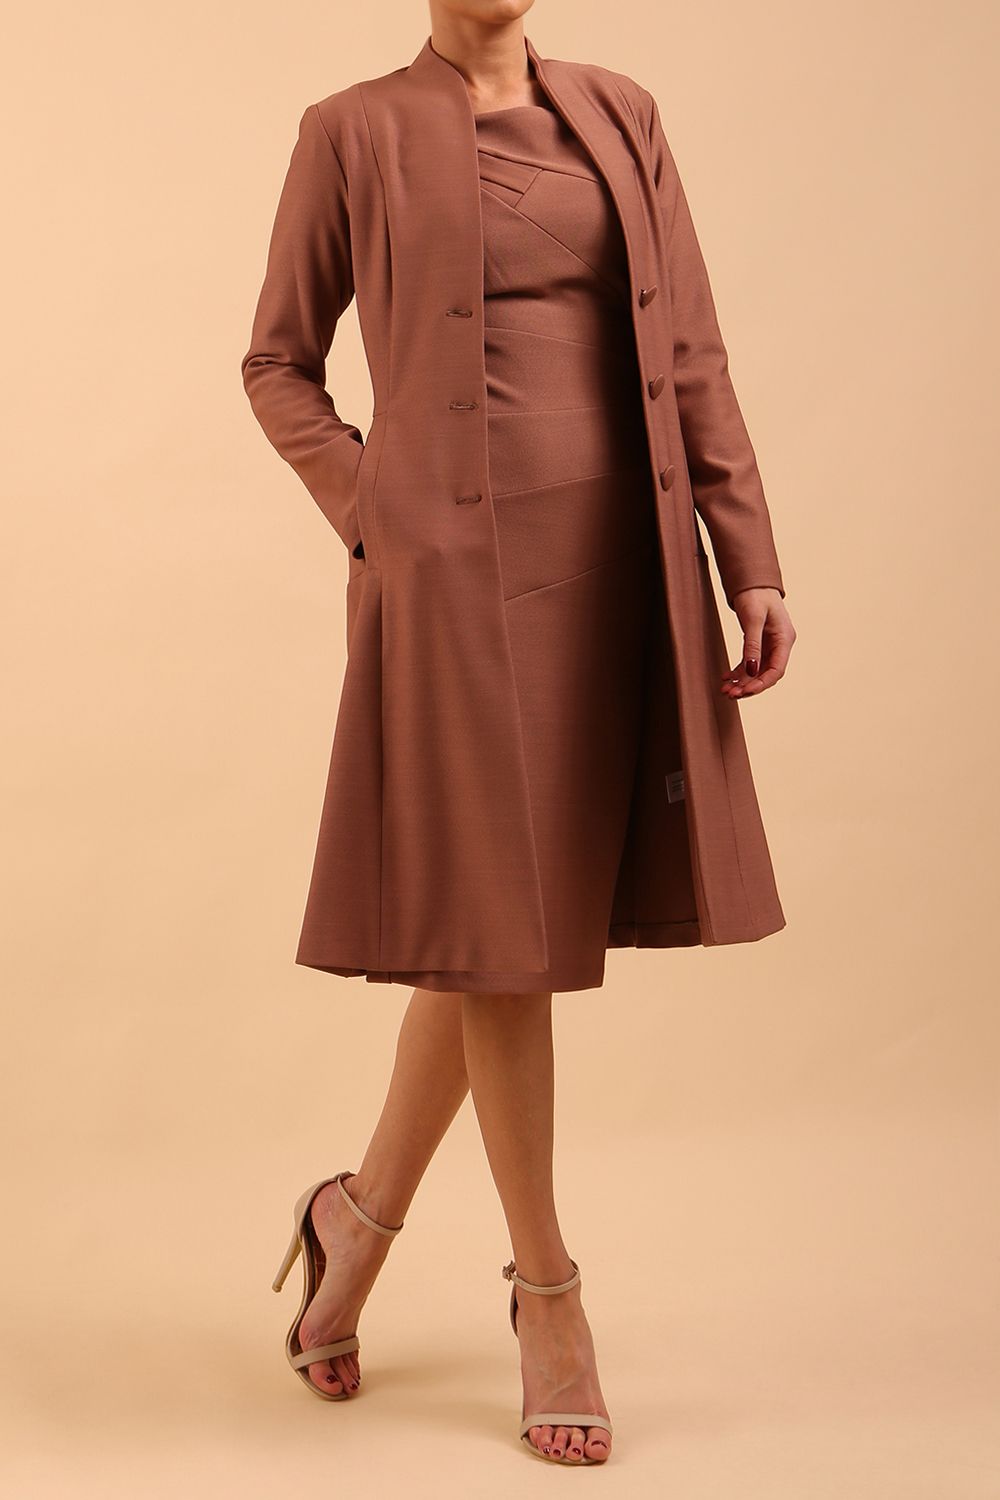  model wearing diva catwalk couture fine raquella coat with buttons across the front and long sleeves with high neck and pockets in citrus green colour front